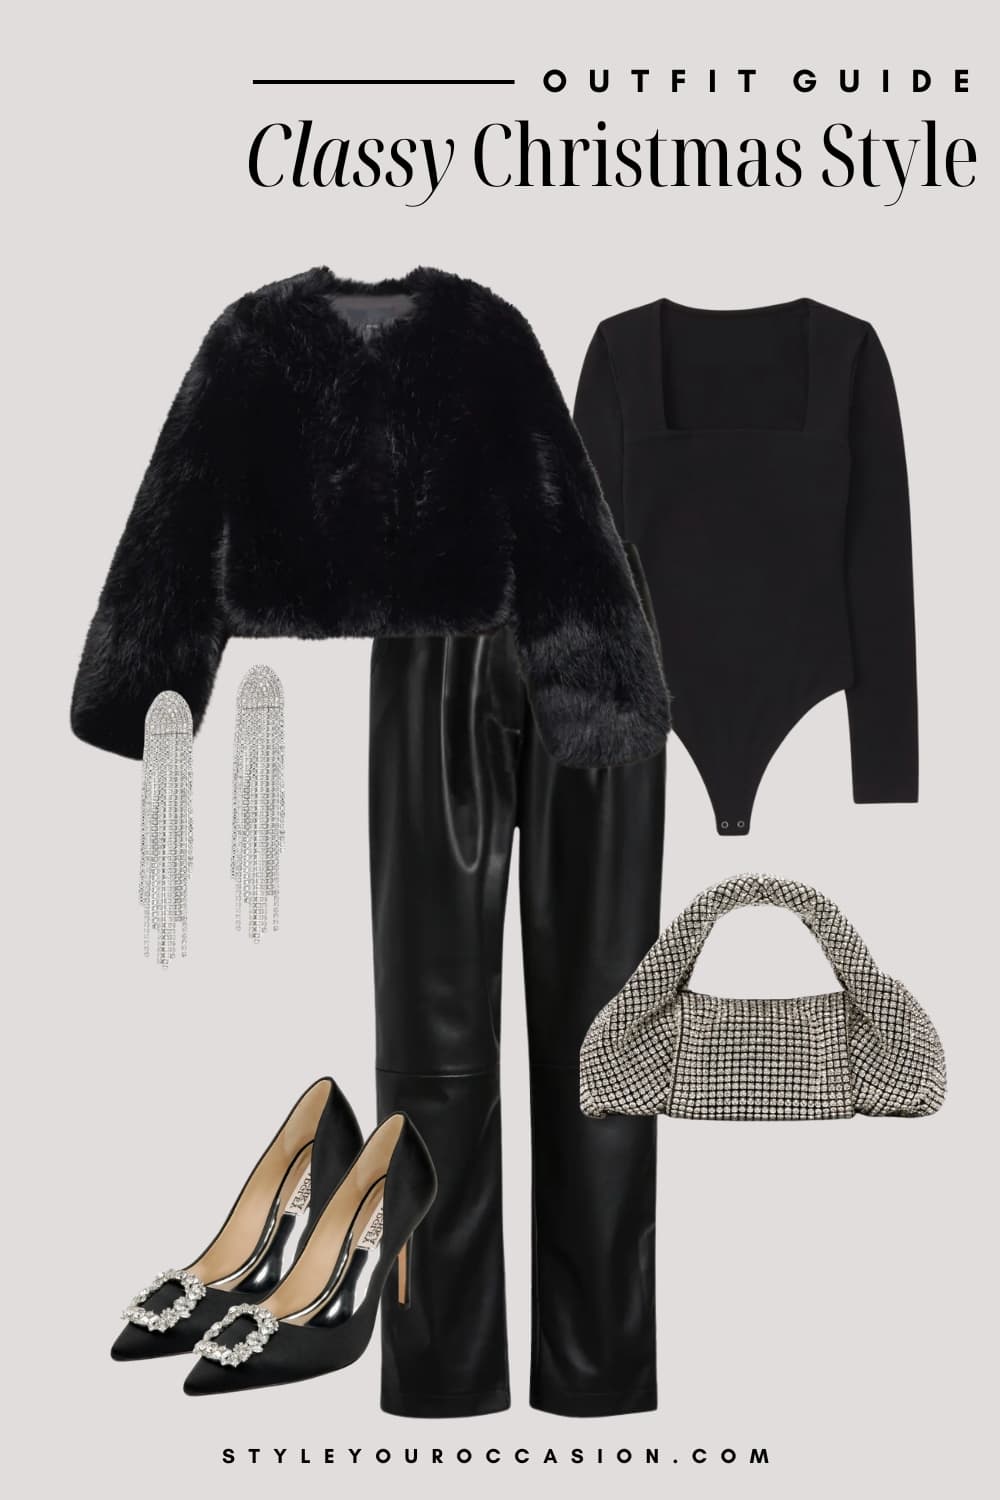 An image board of a Christmas outfit featuring black leather pants, a black square neck bodysuit, a faux fur black top, black heels with silver buckles, a silver rhinestone handbag, and dangly silver earrings